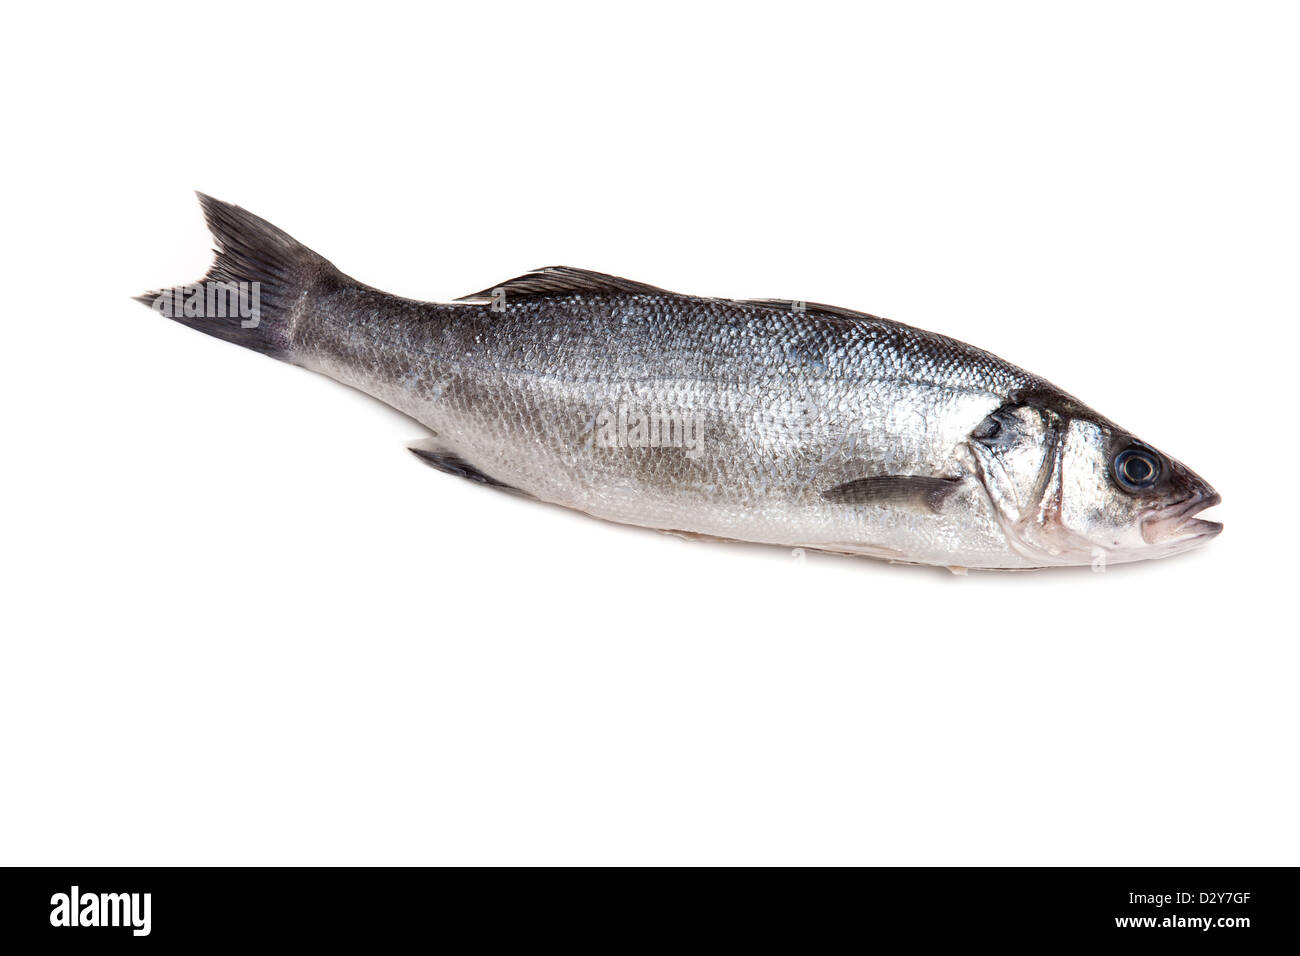 Sea bass fish isolated on a white studio background. Stock Photo